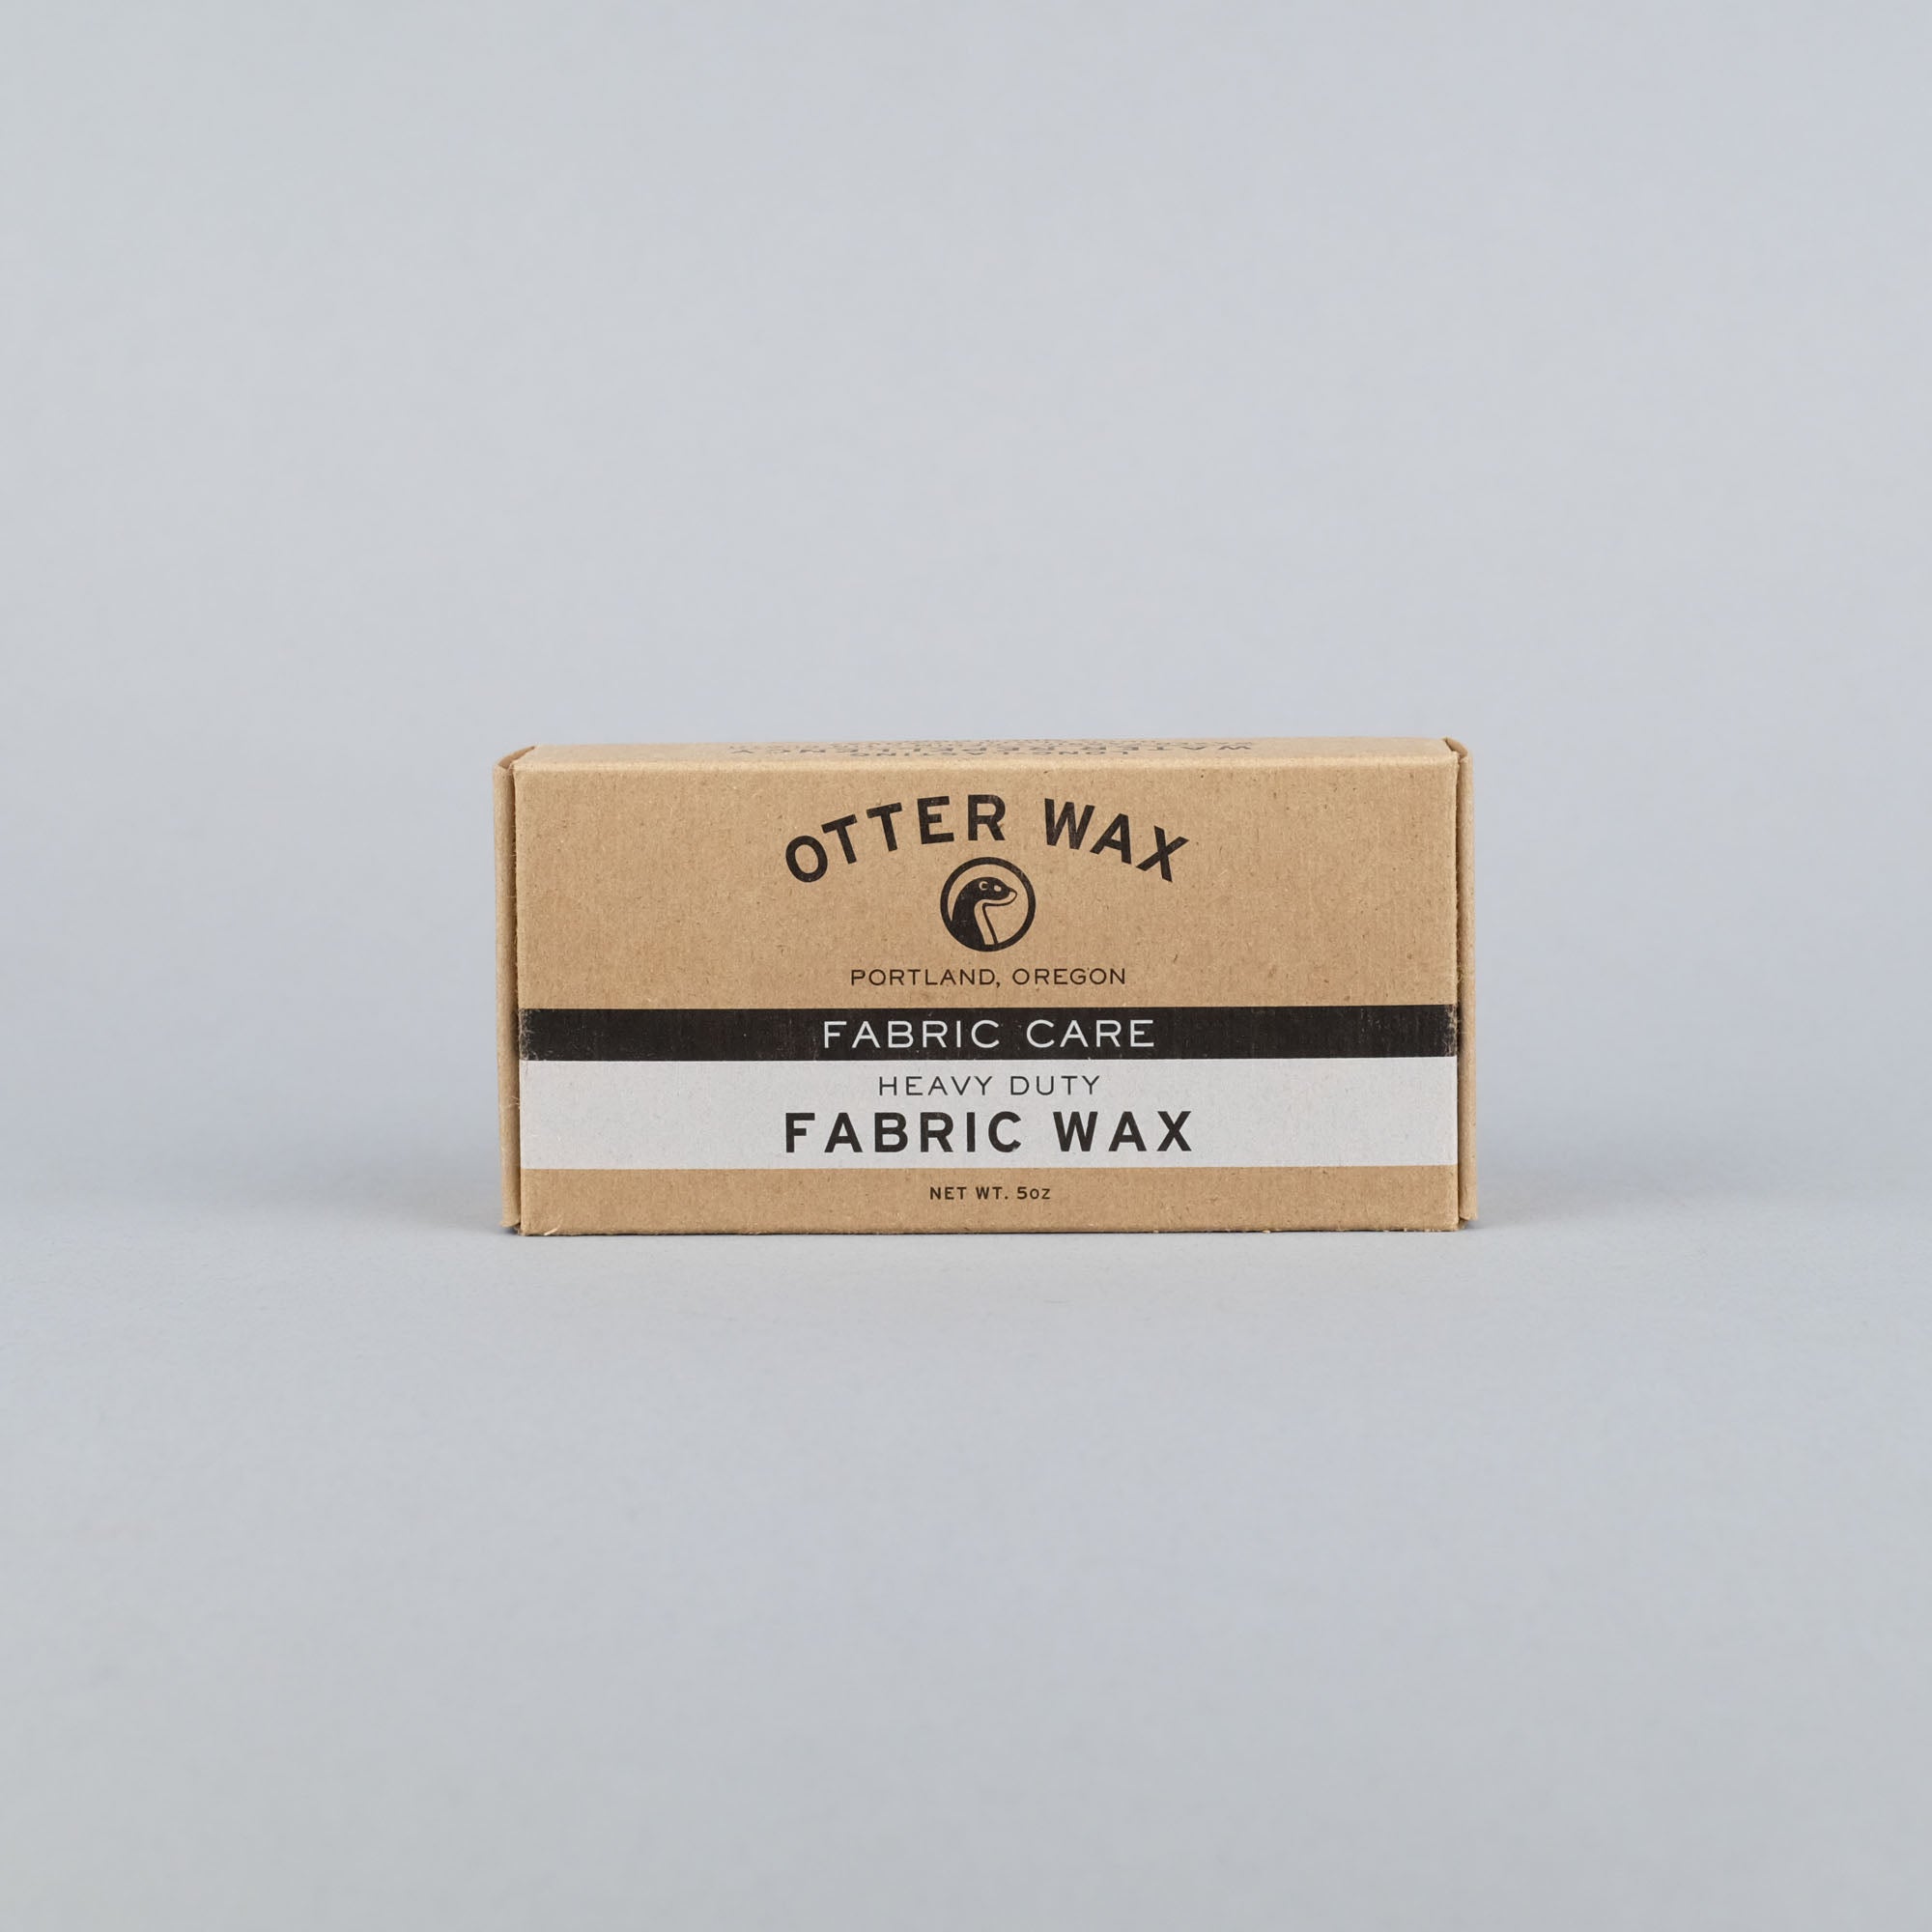  Customer reviews: Otter Wax Fabric Wax Bar, Large Bar, Durable Rain Protection, Made in the USA, Waterproof Canvas, Shoes, Hats,  Jacket, Bags, Outdoor Gear, Clothing